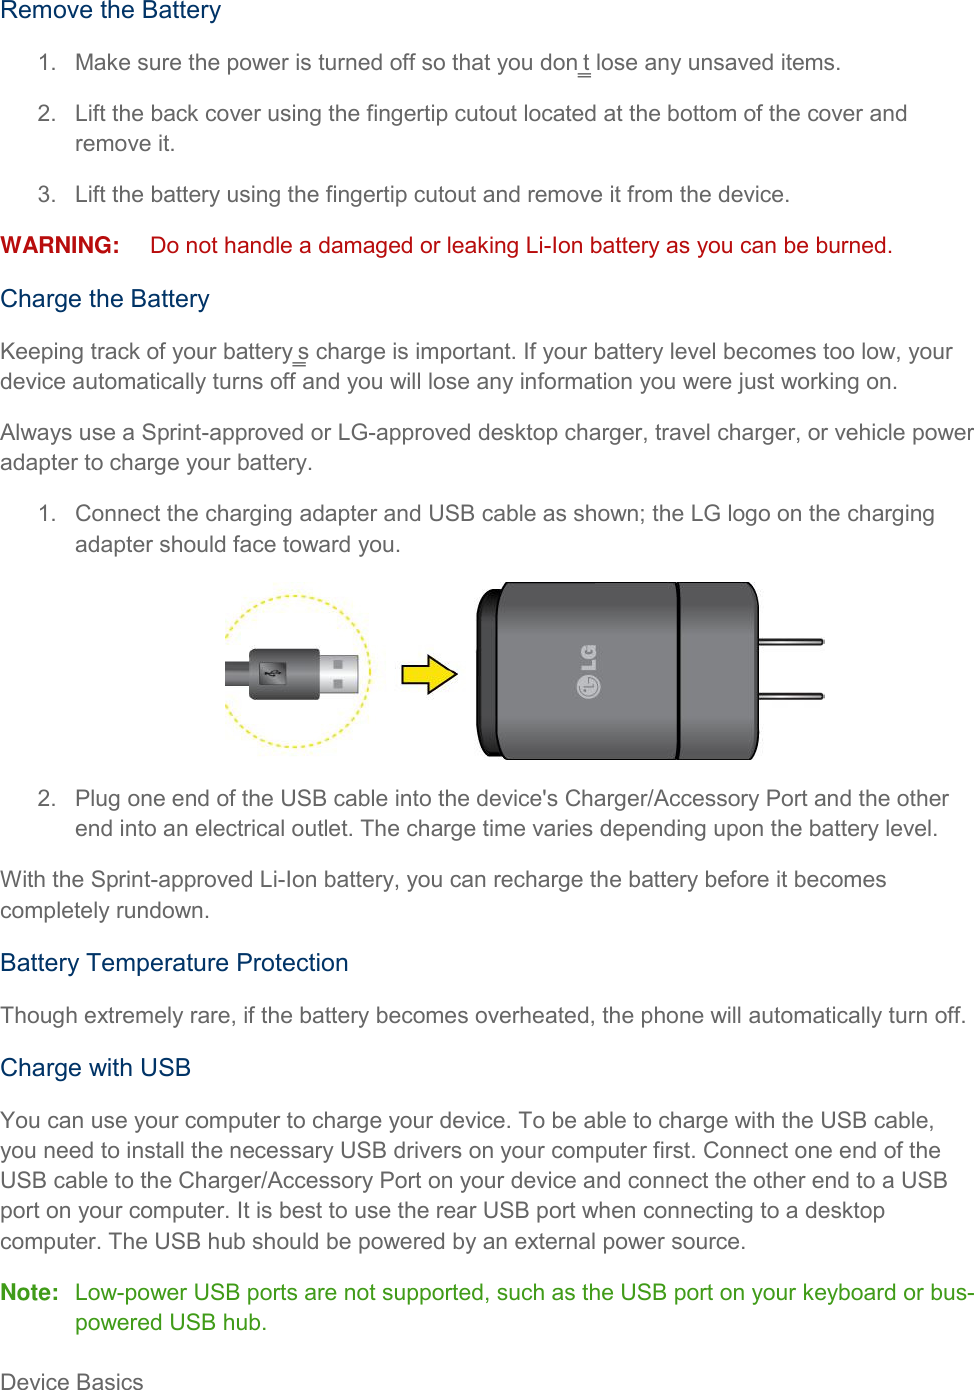 Device Basics     Remove the Battery 1.  Make sure the power is turned off so that you don‗t lose any unsaved items. 2.  Lift the back cover using the fingertip cutout located at the bottom of the cover and remove it. 3.  Lift the battery using the fingertip cutout and remove it from the device. WARNING:  Do not handle a damaged or leaking Li-Ion battery as you can be burned. Charge the Battery Keeping track of your battery‗s charge is important. If your battery level becomes too low, your device automatically turns off and you will lose any information you were just working on. Always use a Sprint-approved or LG-approved desktop charger, travel charger, or vehicle power adapter to charge your battery. 1.  Connect the charging adapter and USB cable as shown; the LG logo on the charging adapter should face toward you.  2.  Plug one end of the USB cable into the device&apos;s Charger/Accessory Port and the other end into an electrical outlet. The charge time varies depending upon the battery level. With the Sprint-approved Li-Ion battery, you can recharge the battery before it becomes completely rundown. Battery Temperature Protection Though extremely rare, if the battery becomes overheated, the phone will automatically turn off. Charge with USB You can use your computer to charge your device. To be able to charge with the USB cable, you need to install the necessary USB drivers on your computer first. Connect one end of the USB cable to the Charger/Accessory Port on your device and connect the other end to a USB port on your computer. It is best to use the rear USB port when connecting to a desktop computer. The USB hub should be powered by an external power source. Note:  Low-power USB ports are not supported, such as the USB port on your keyboard or bus-powered USB hub. 